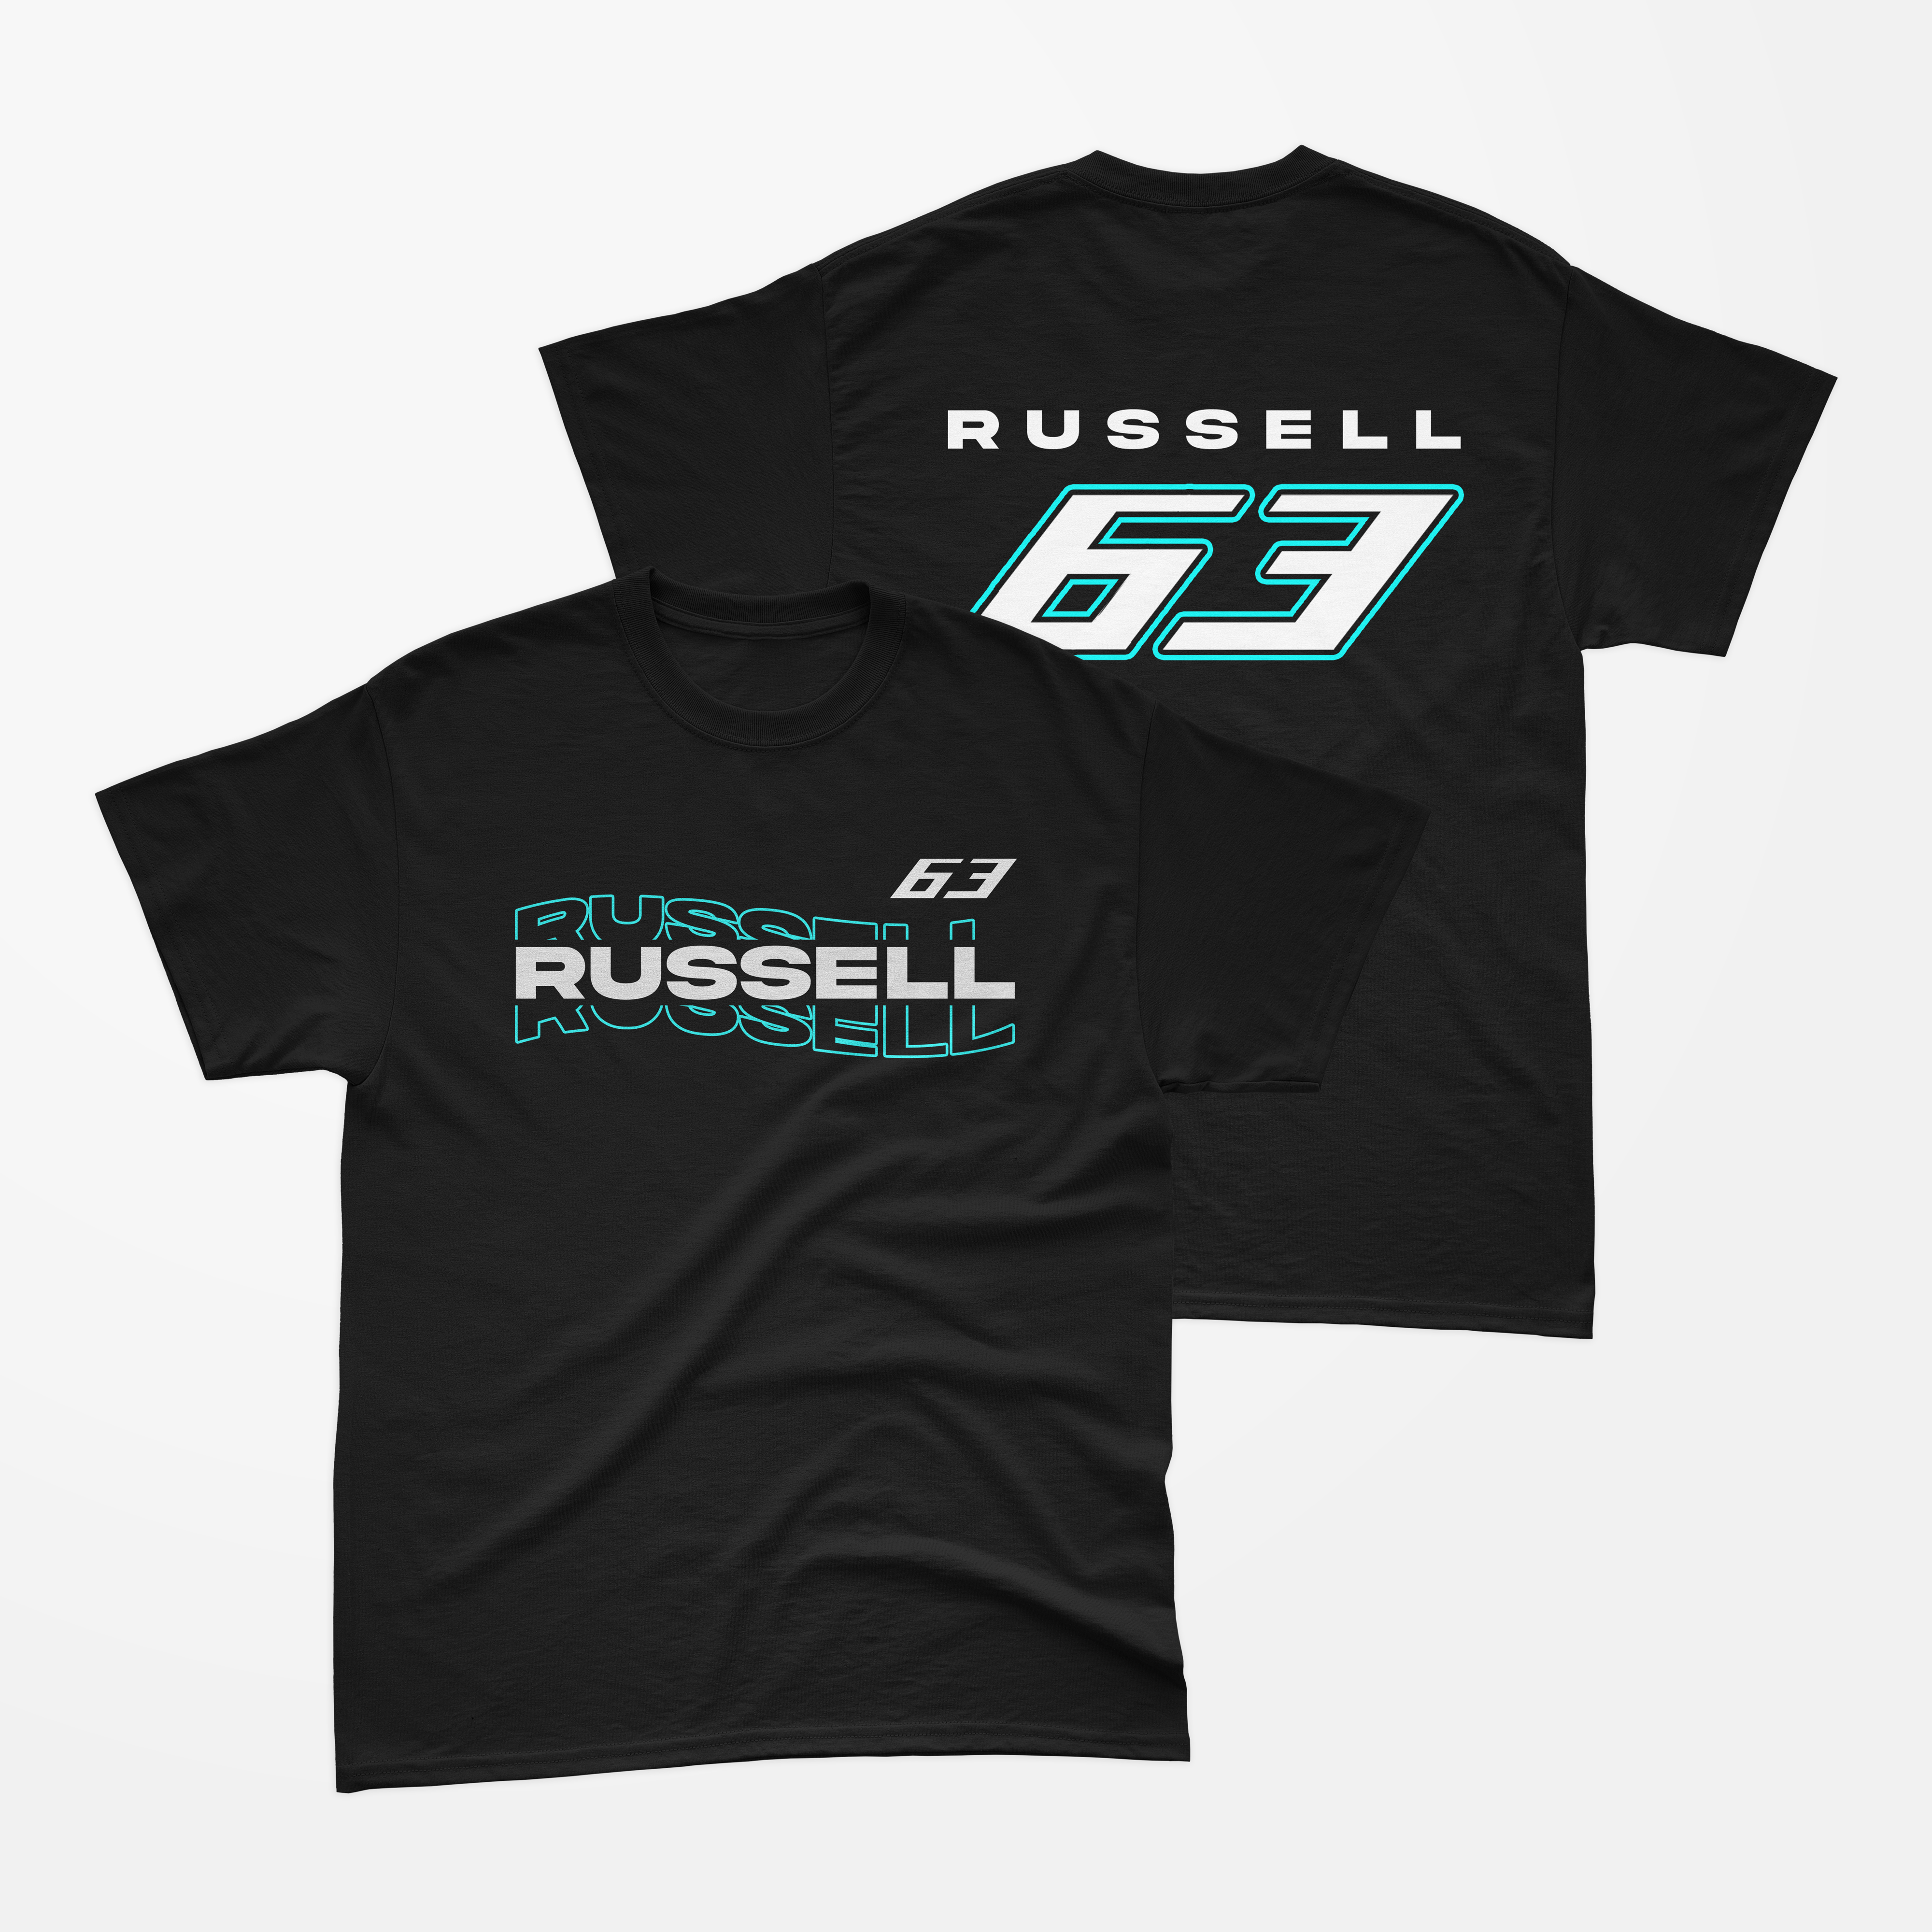 Camiseta George Russell Waves - Autofãs Store